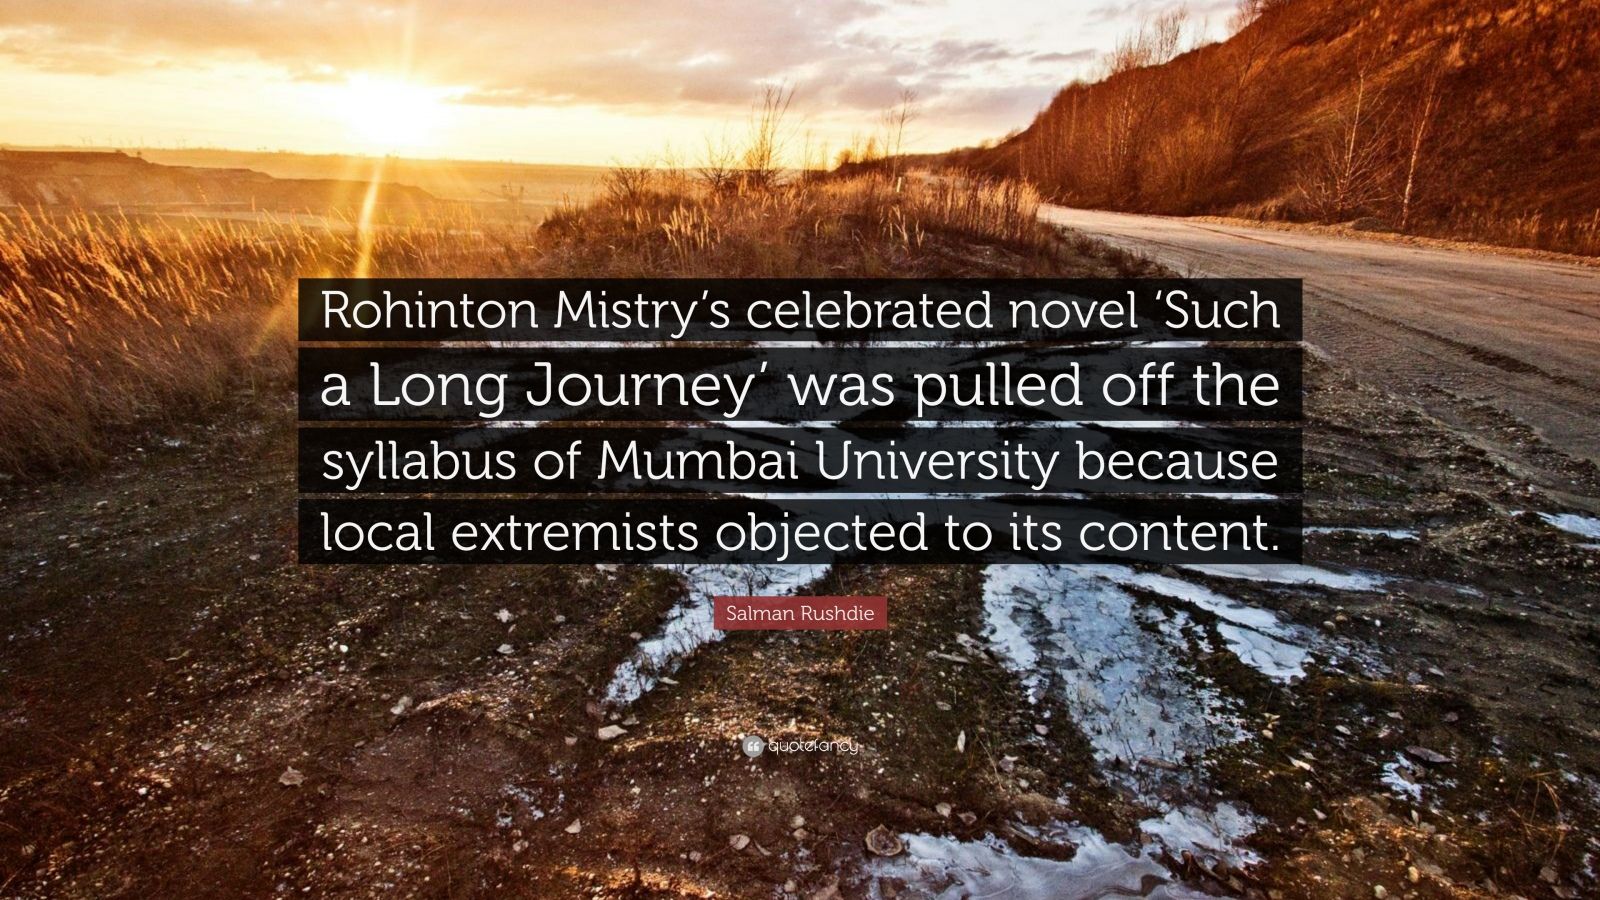 such a long journey rohinton mistry summary